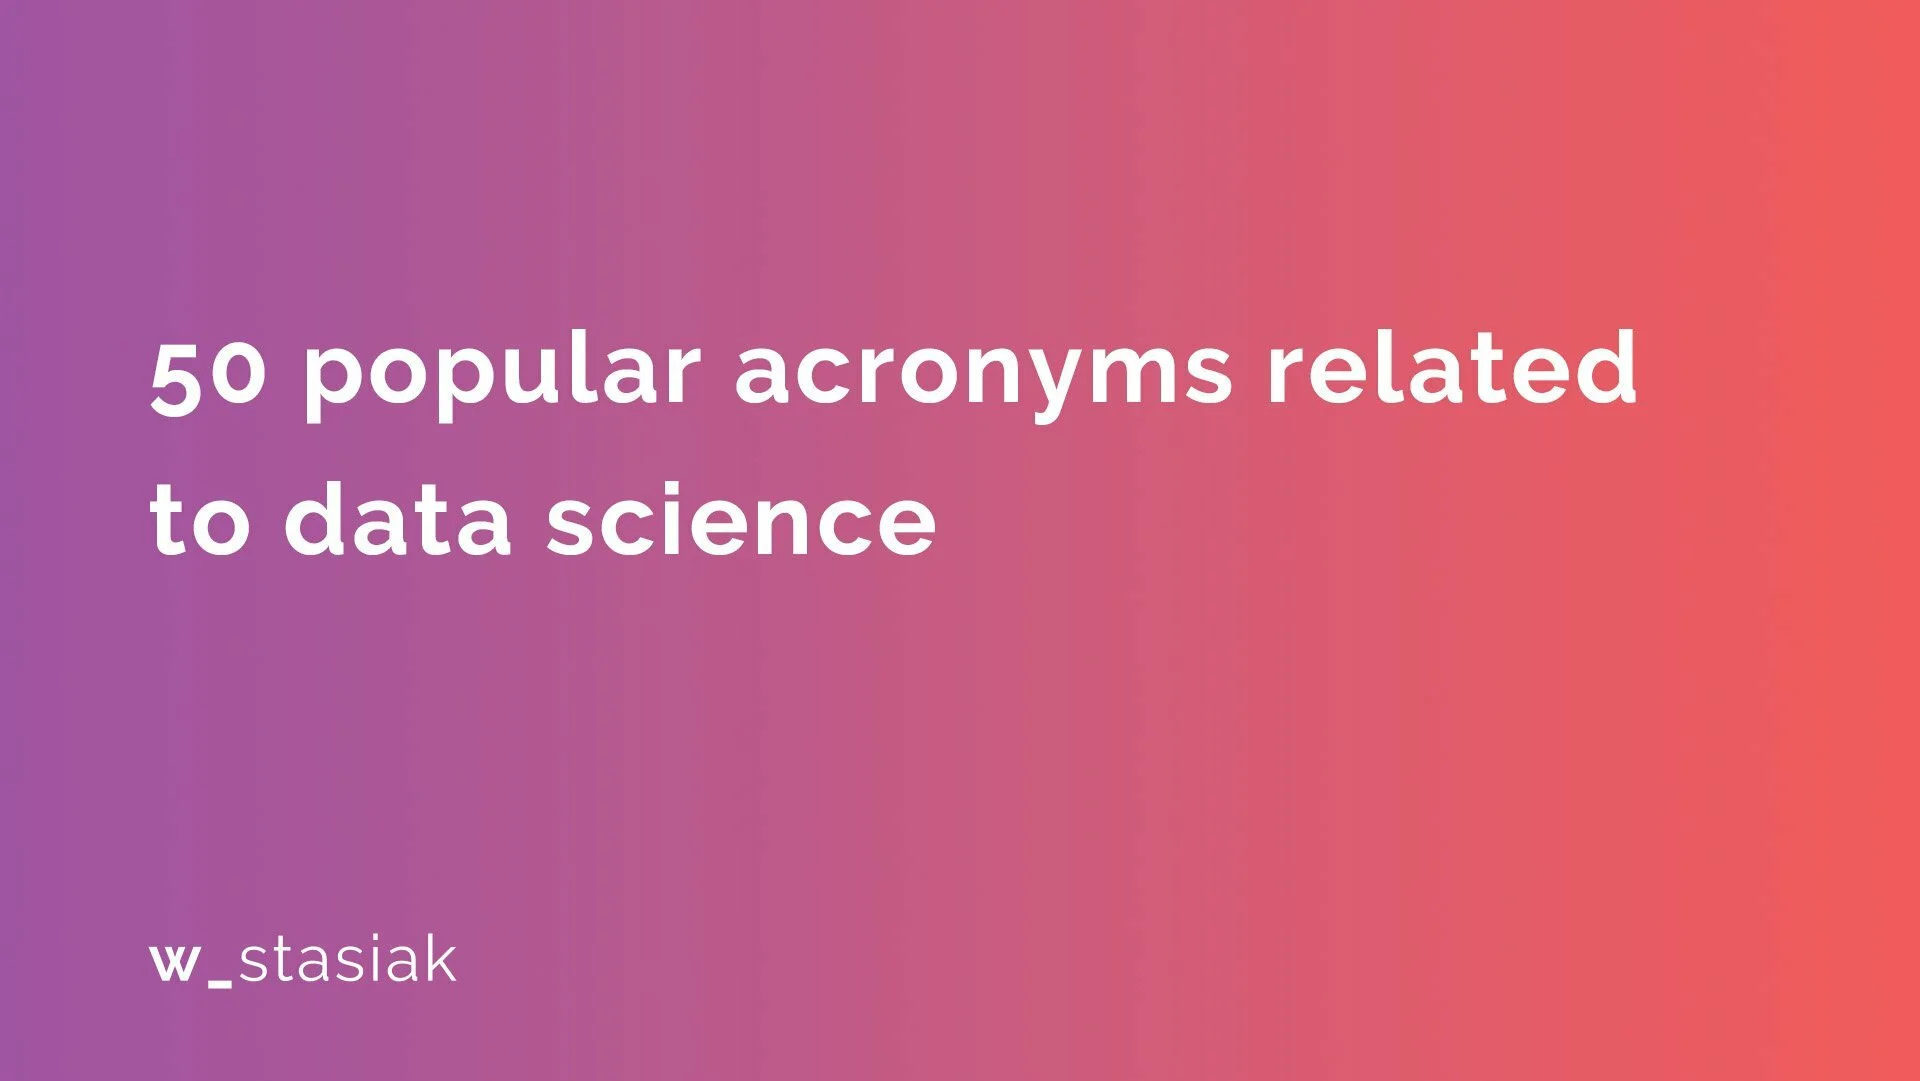 50 popular acronyms related to data science